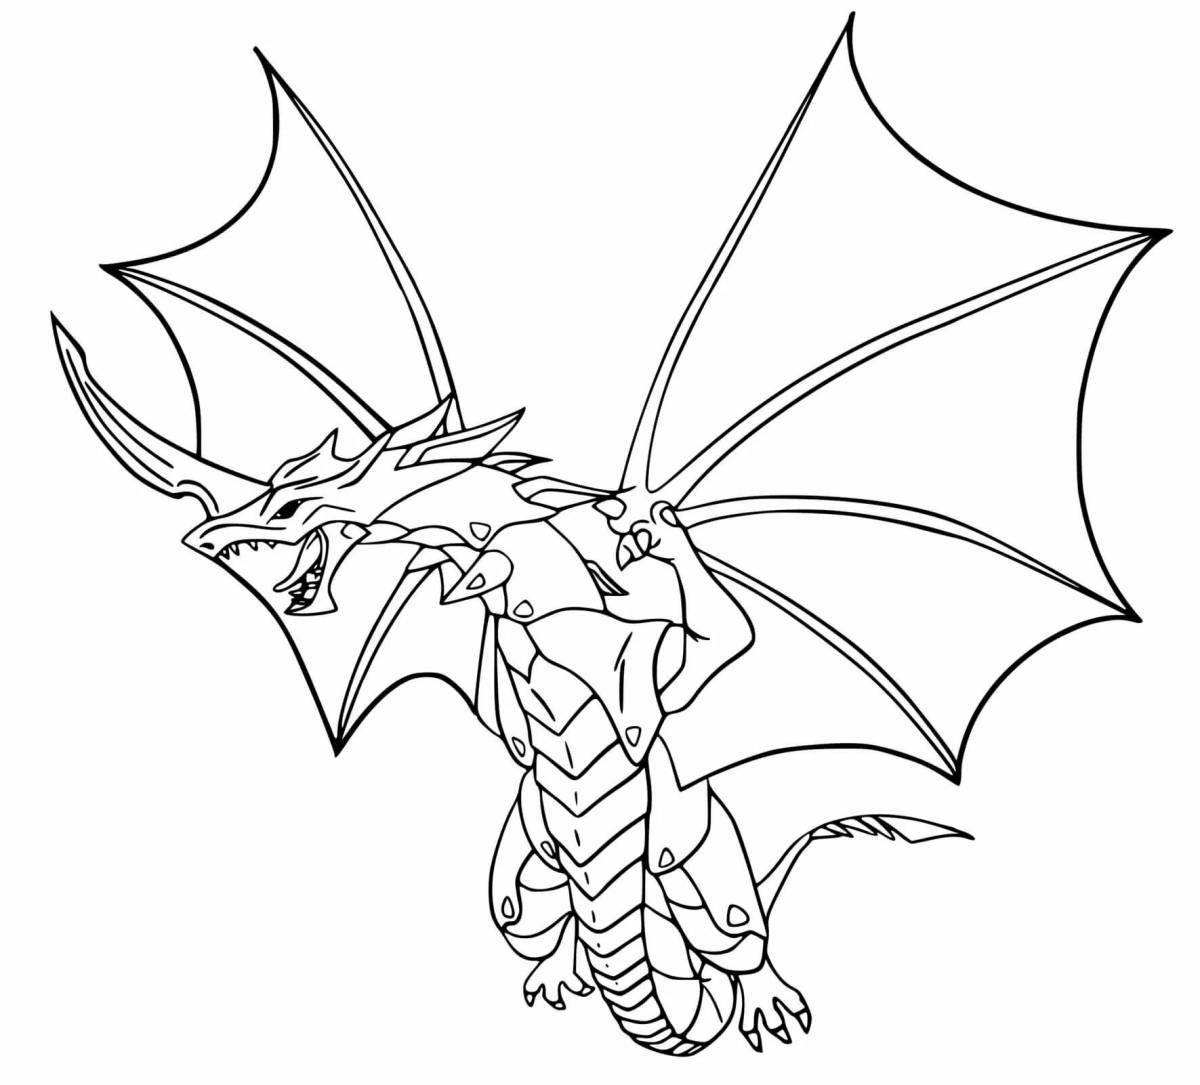 Amazing bakugan coloring page for kids